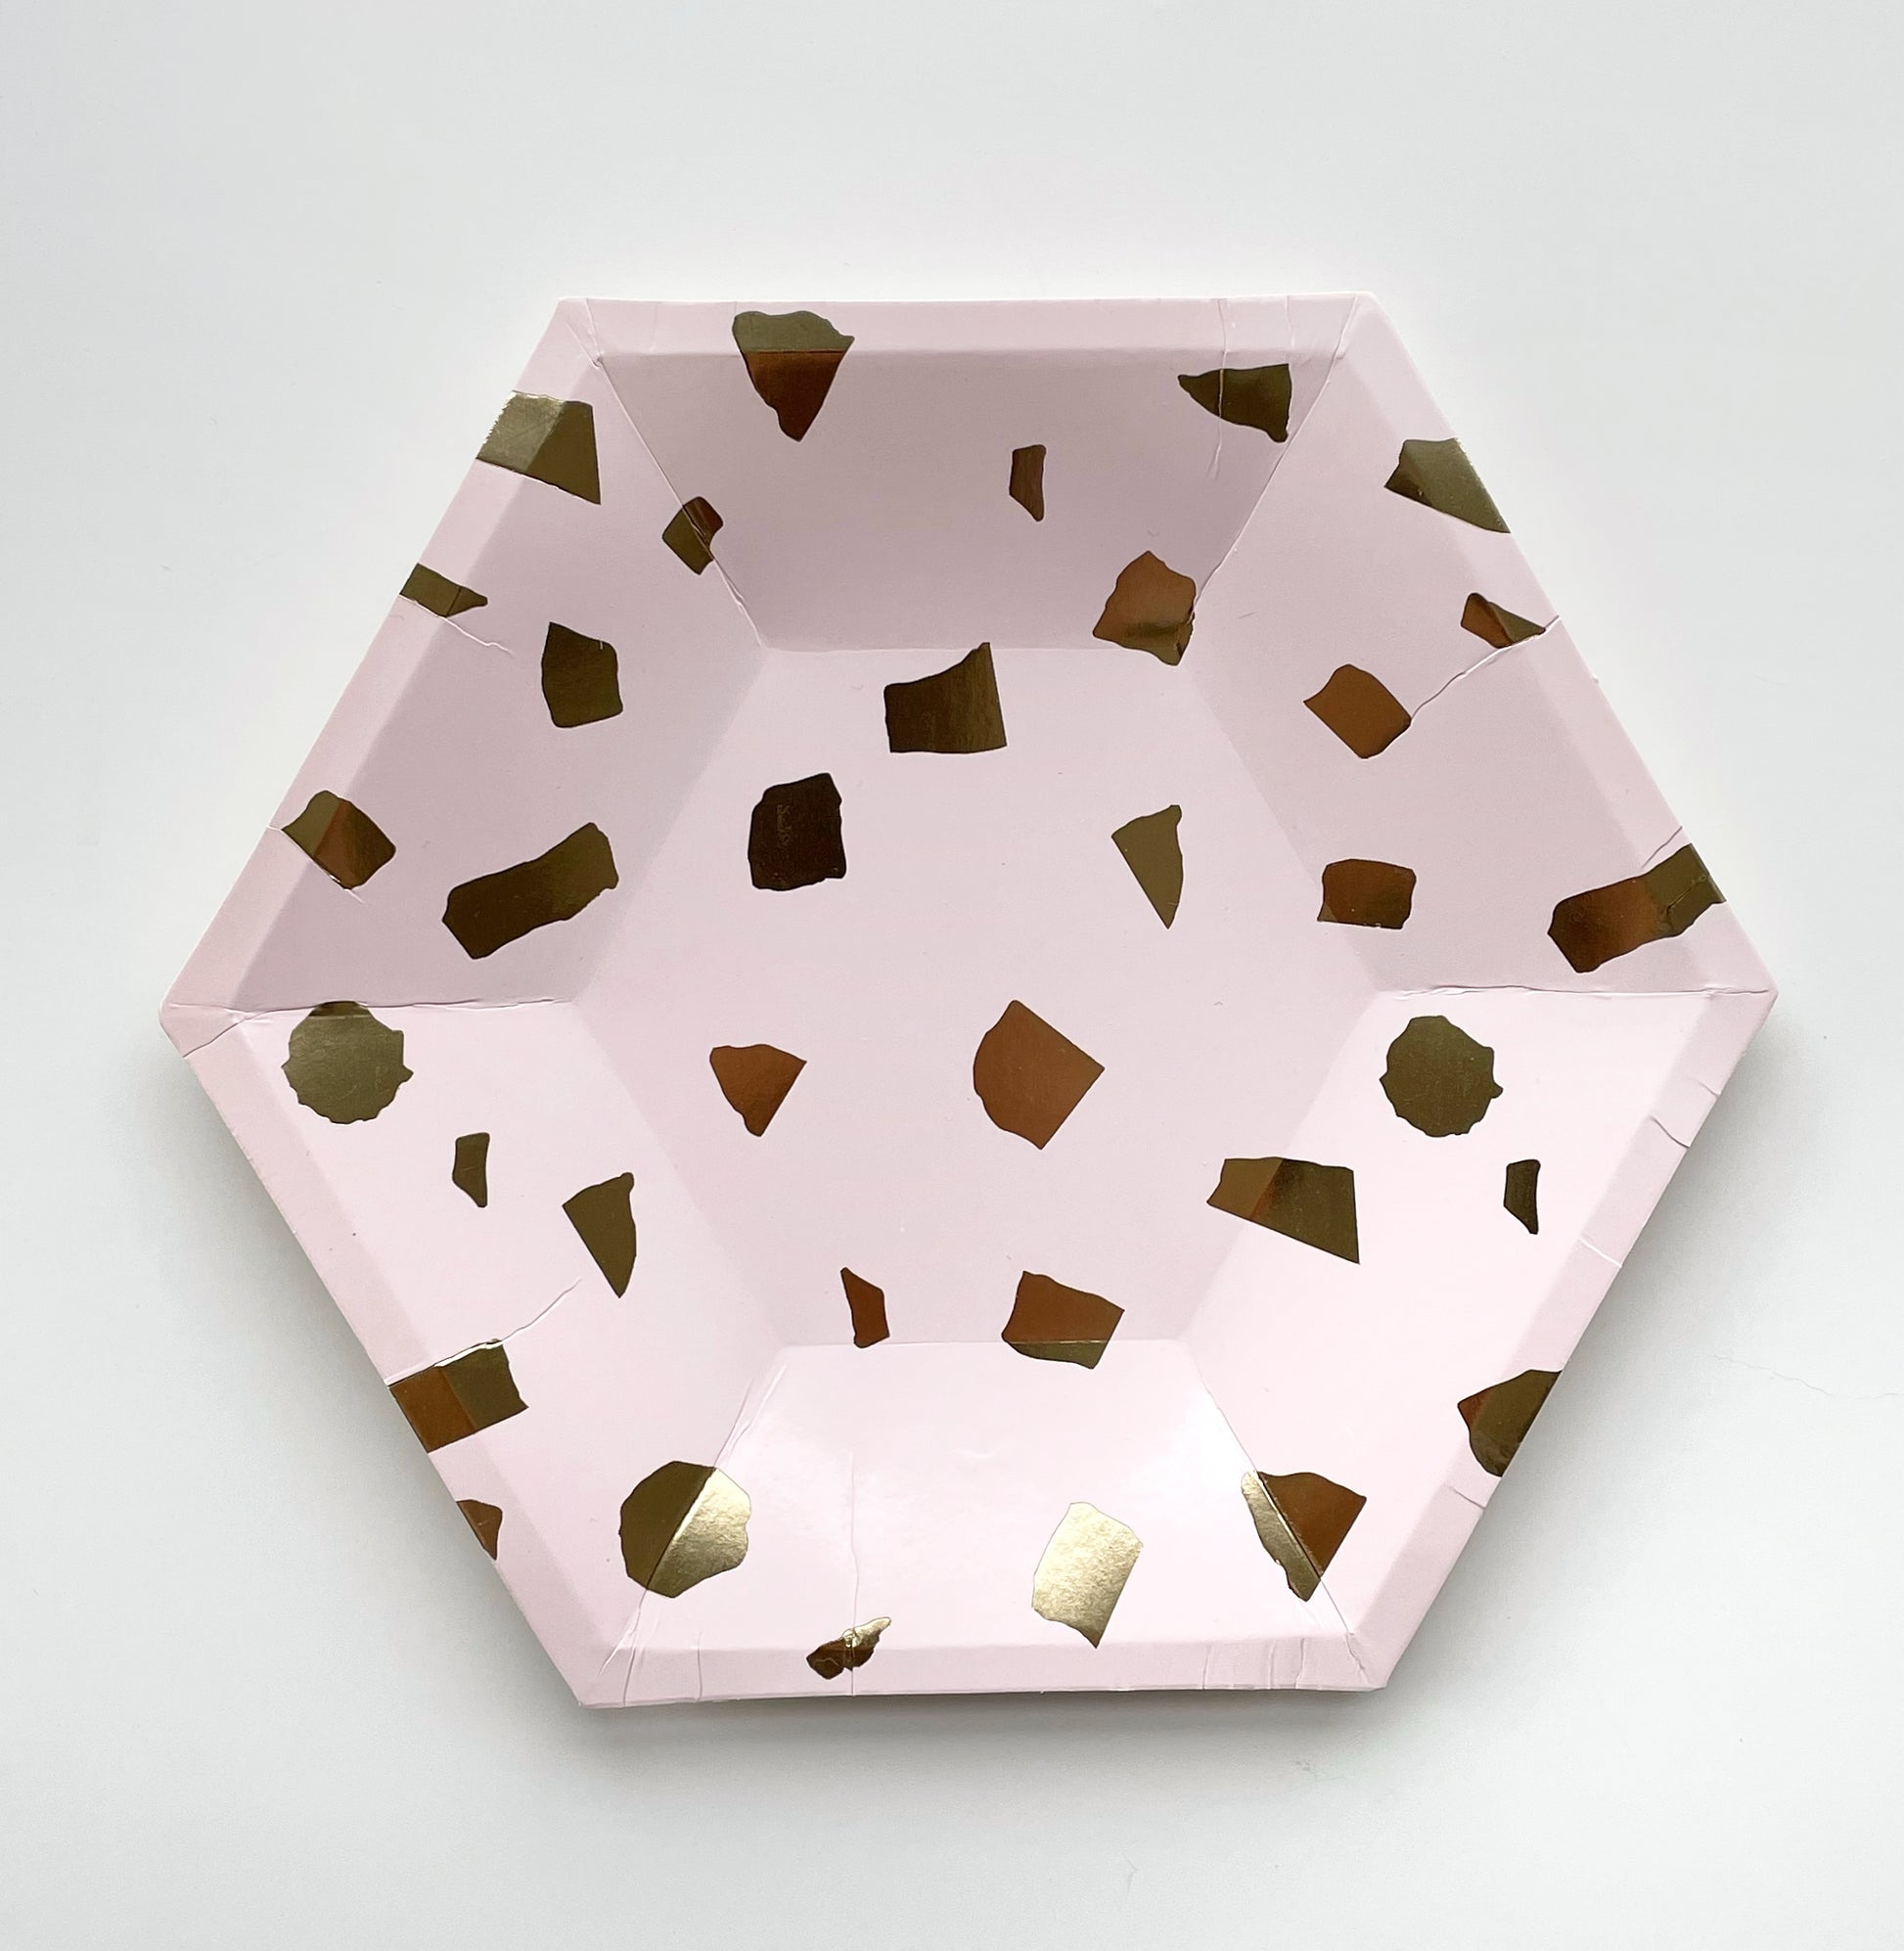 The small paper party plates are in the shape of a hexagon. The plates are a pale blush pink colour with gold foil detail.